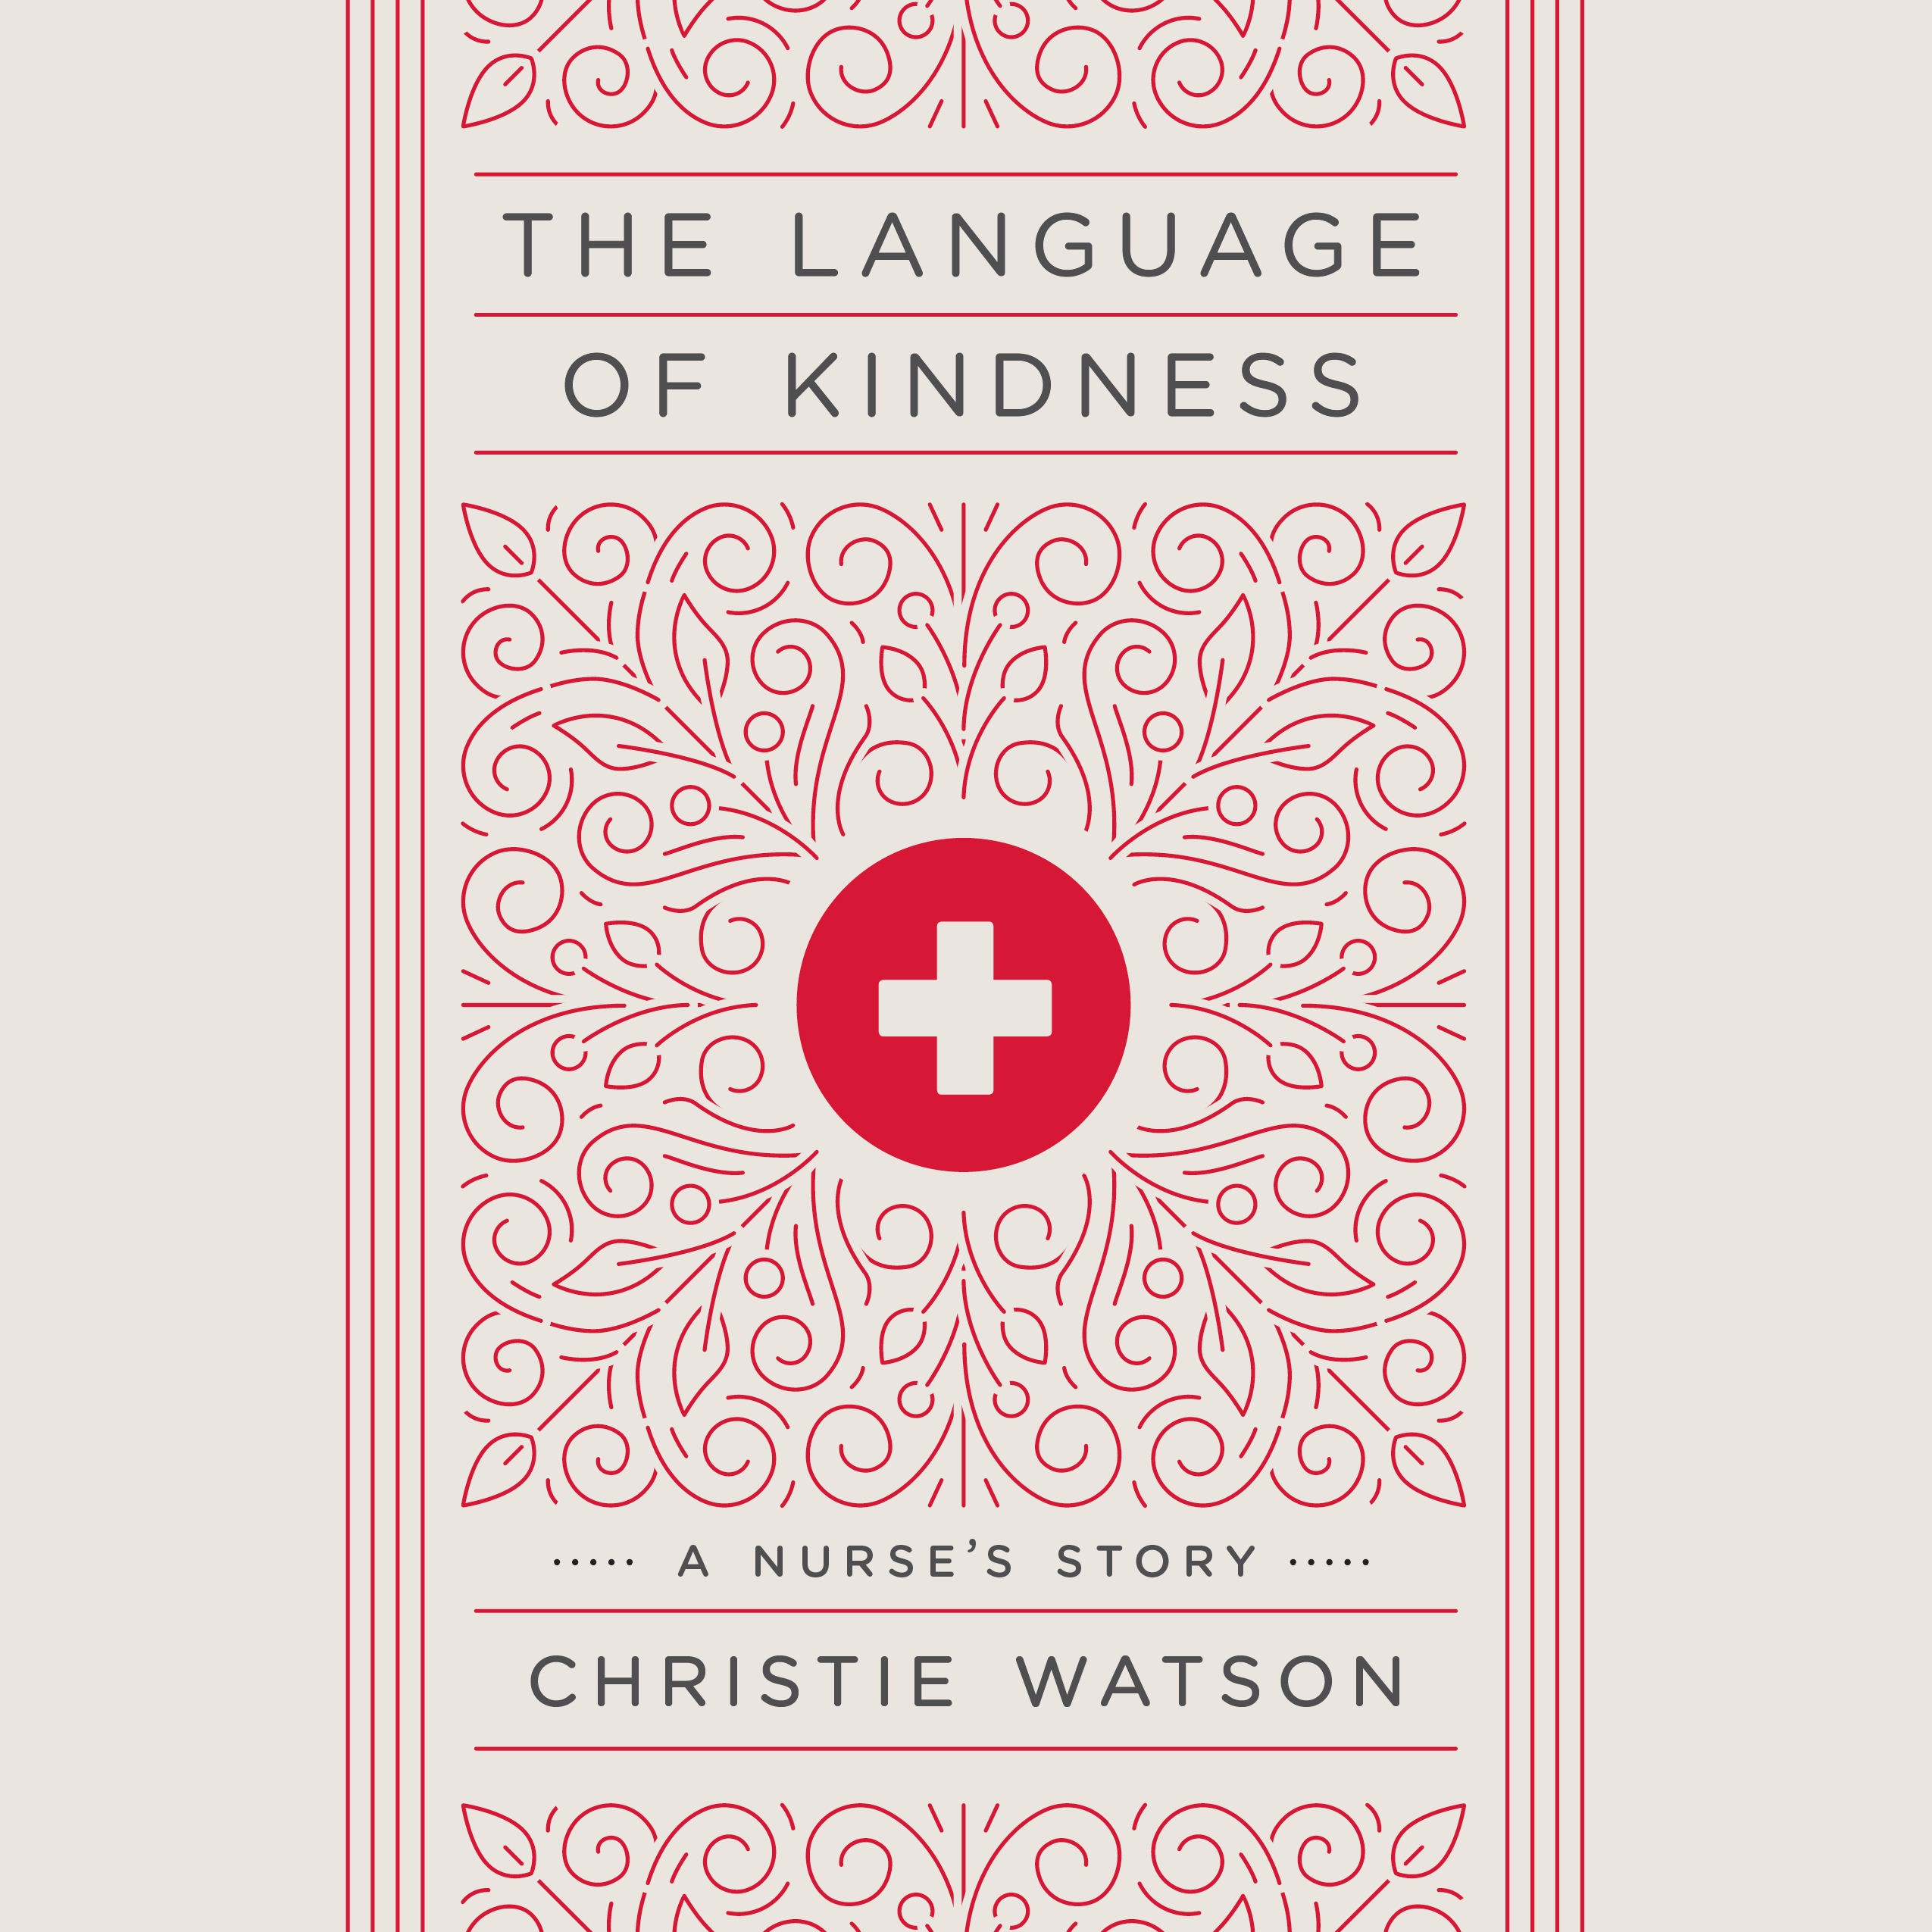 The Language of Kindness.